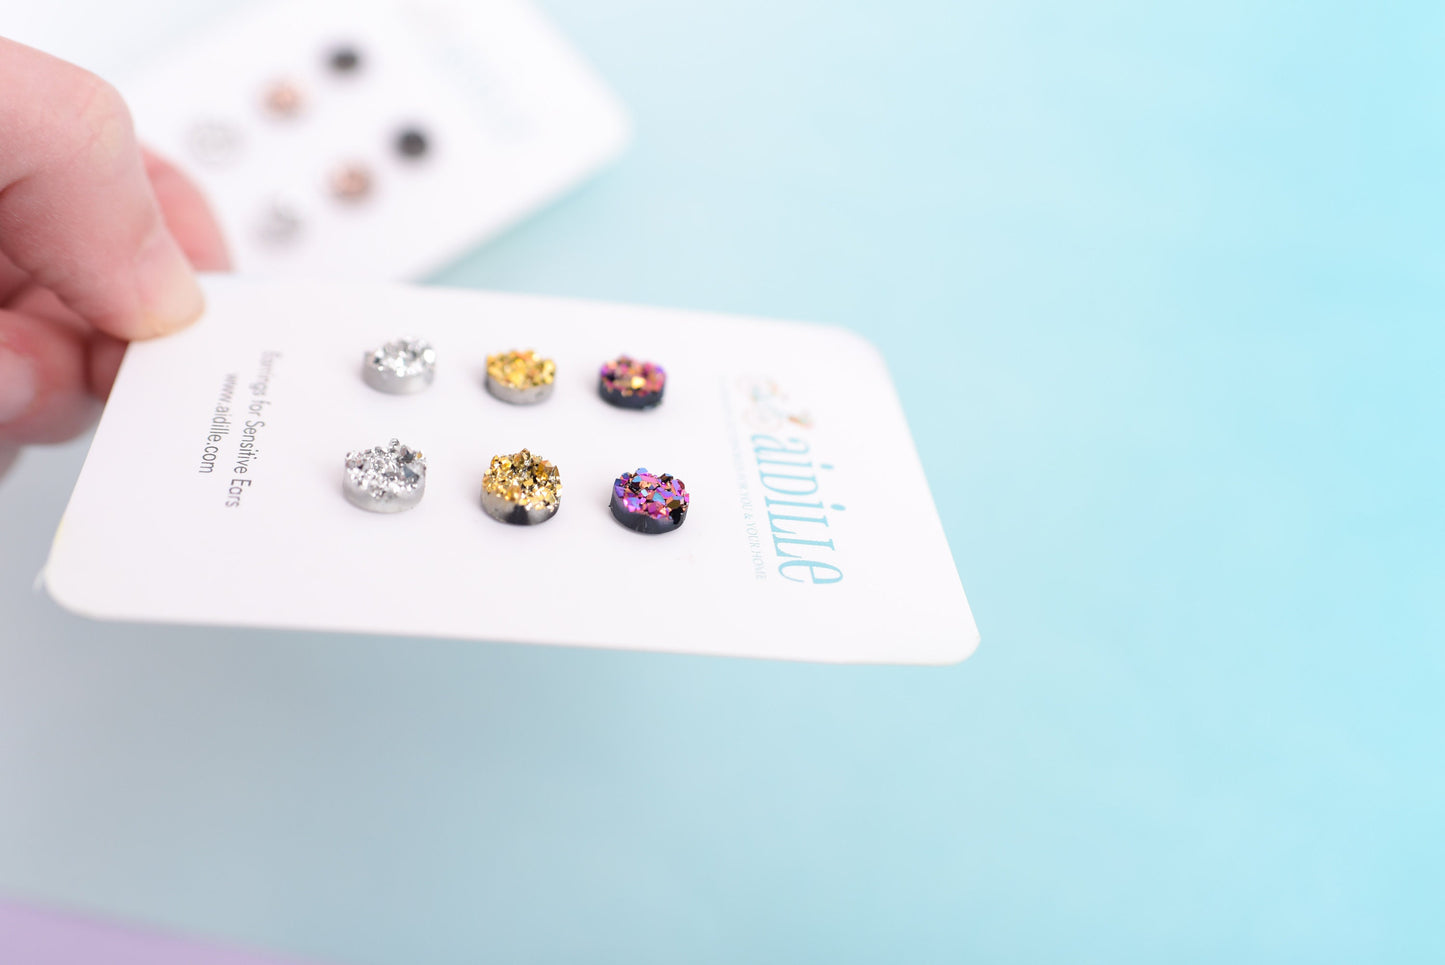 Druzy Metallic 8mm Sparkly Earring Multi Pack Trio- Choose Your Set